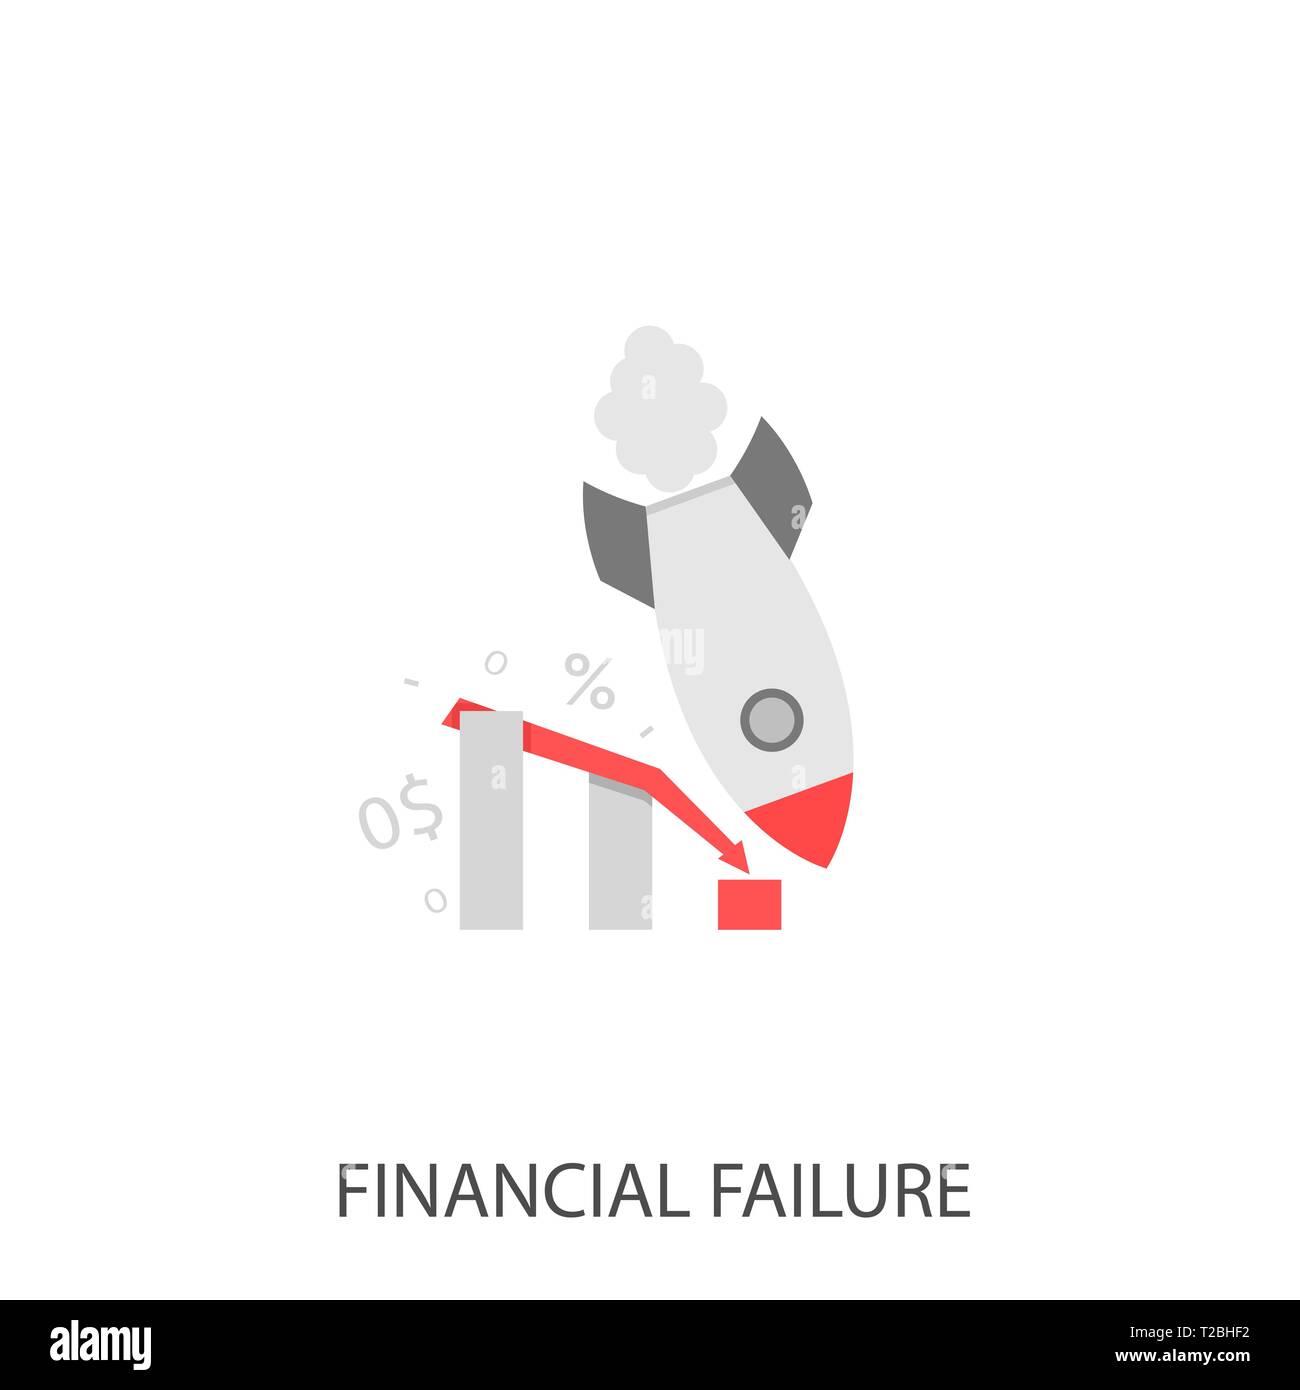 Financial failure. Failure startup concept, falling rocket and declining graph Vector illustration Stock Vector